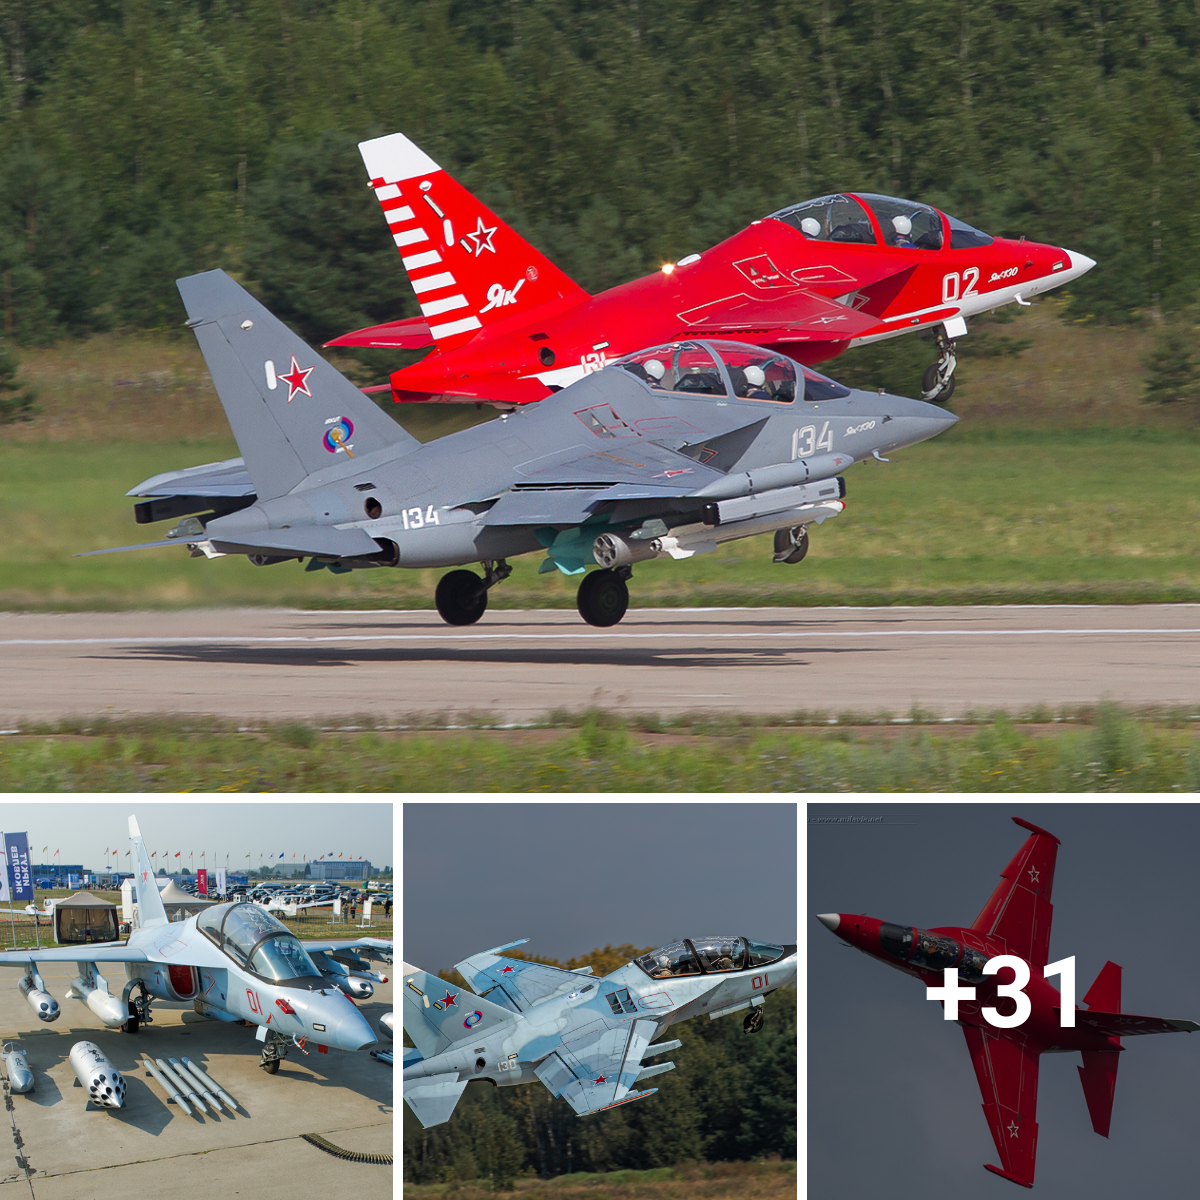 The Yakovlev Yak-130 Mitten is a light combat aircraft and an advanced jet trainer.